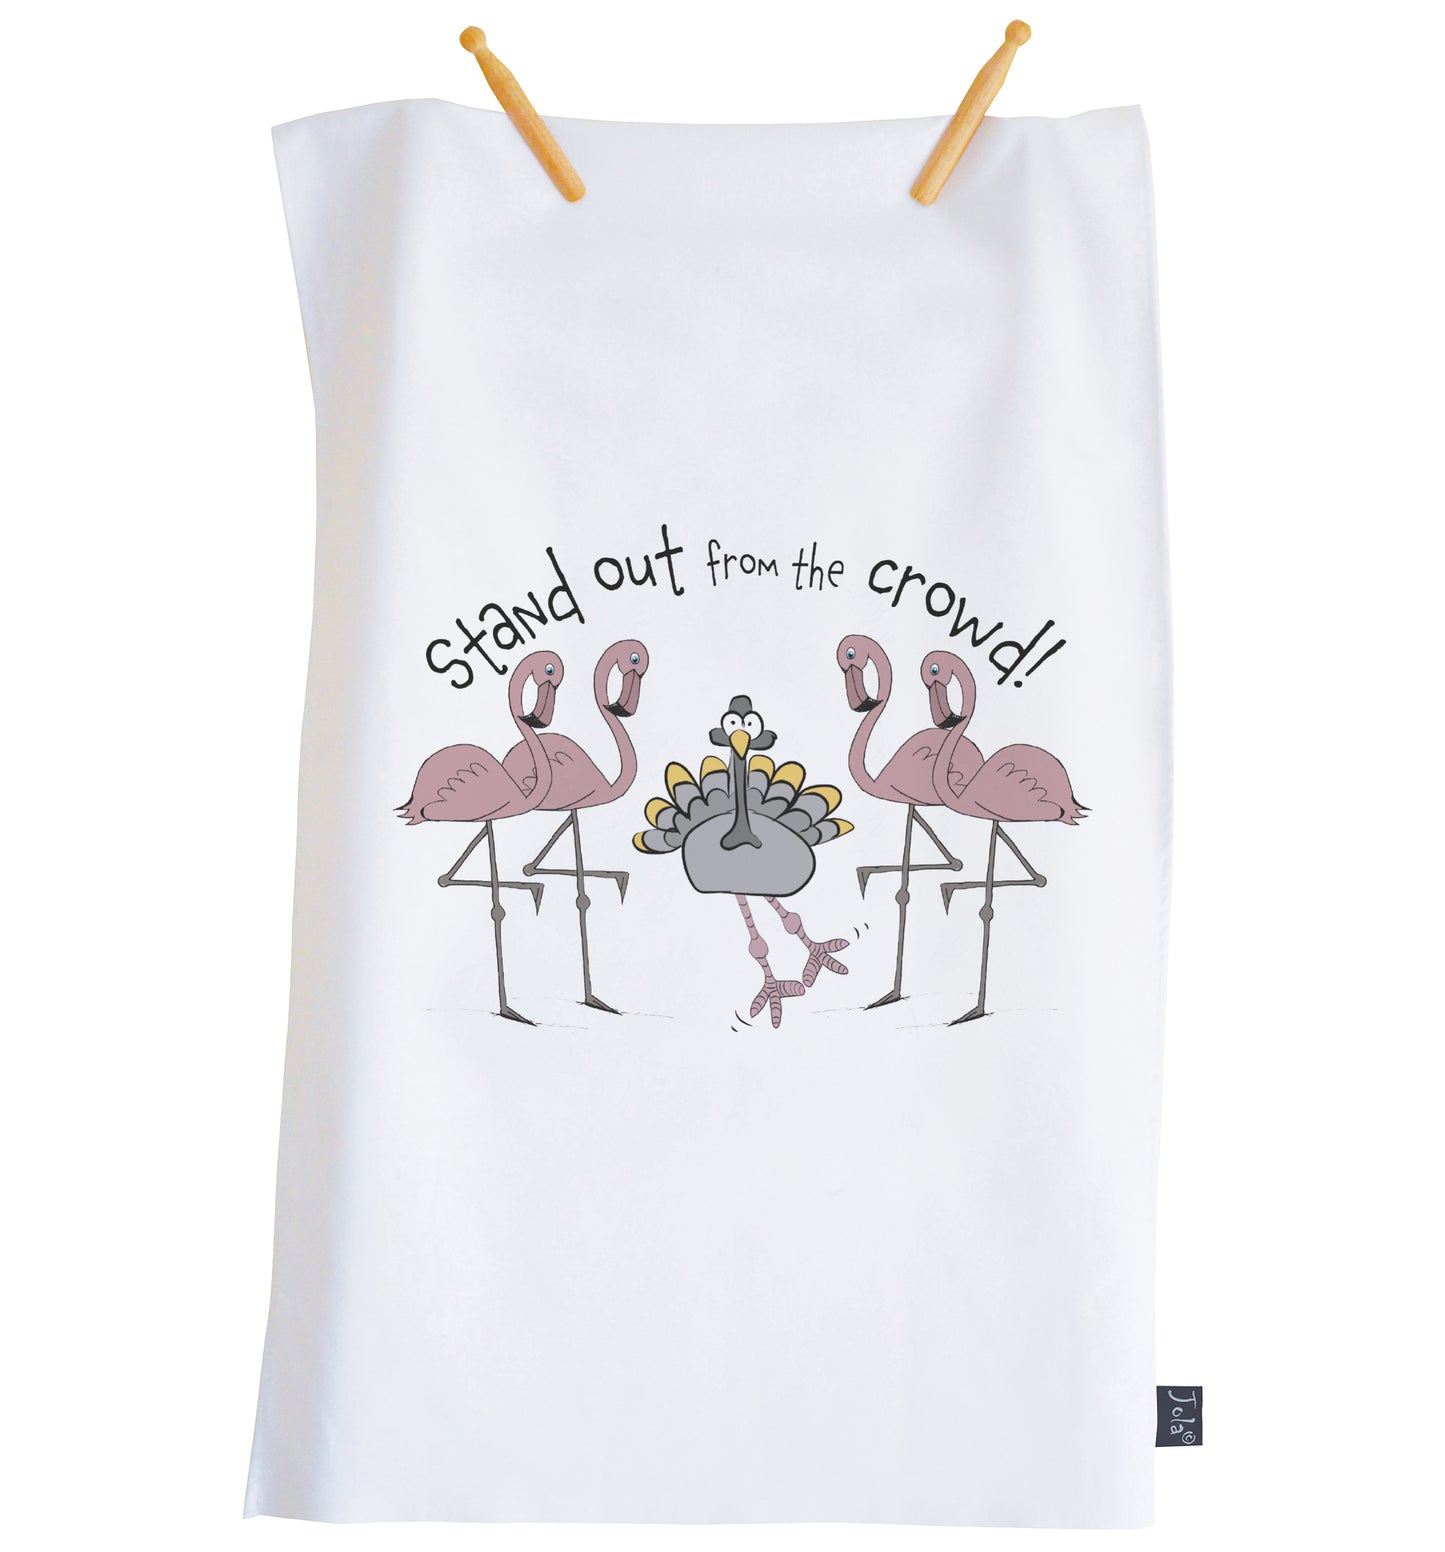 Stand out from the Crowd tea towel